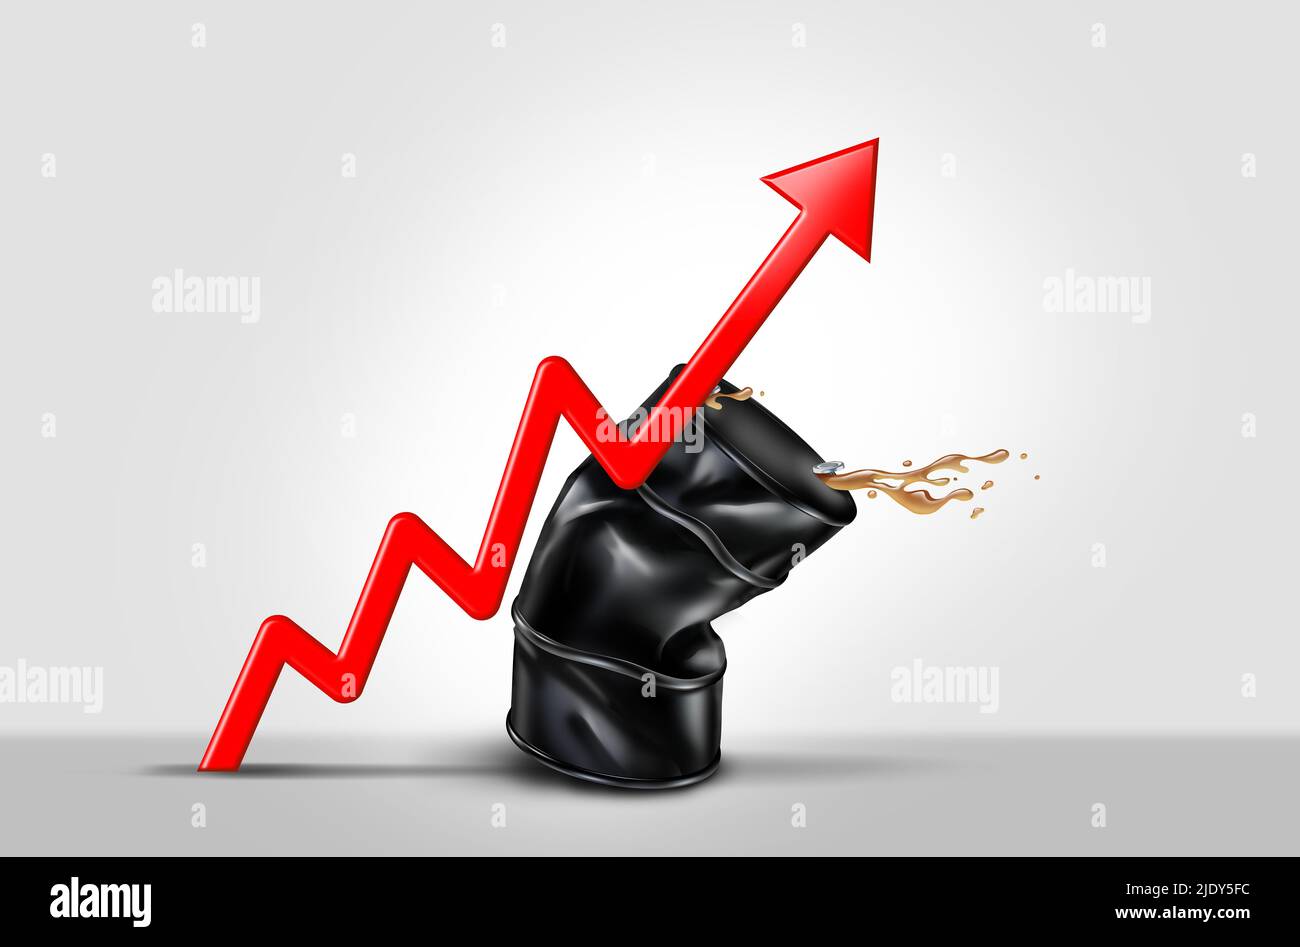 Rising Oil cost and  gas prices surging costs of the energy market as an inflation financial crisis concept coming out of a petroleum barrel hit. Stock Photo